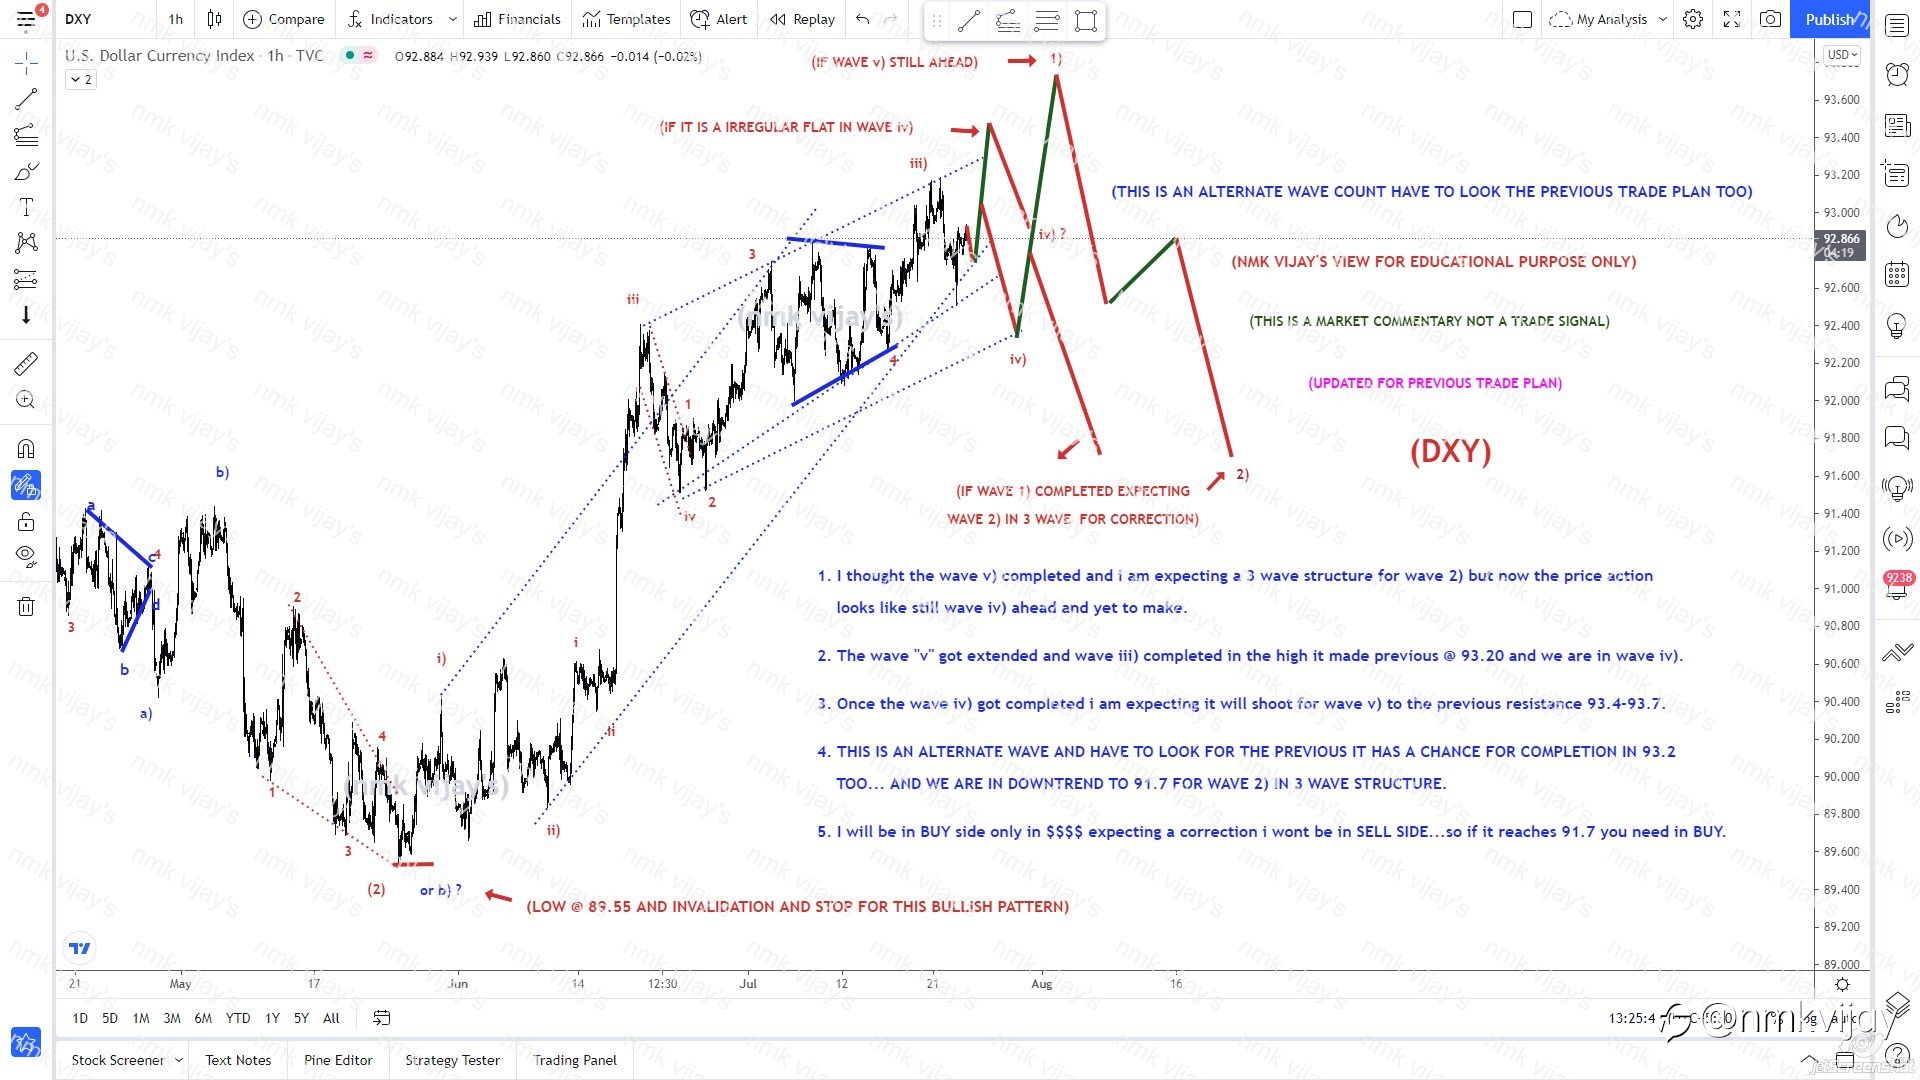 DXY-Still we are in wave iv) and v) to 93.4 (ALTERNATE VIEW)